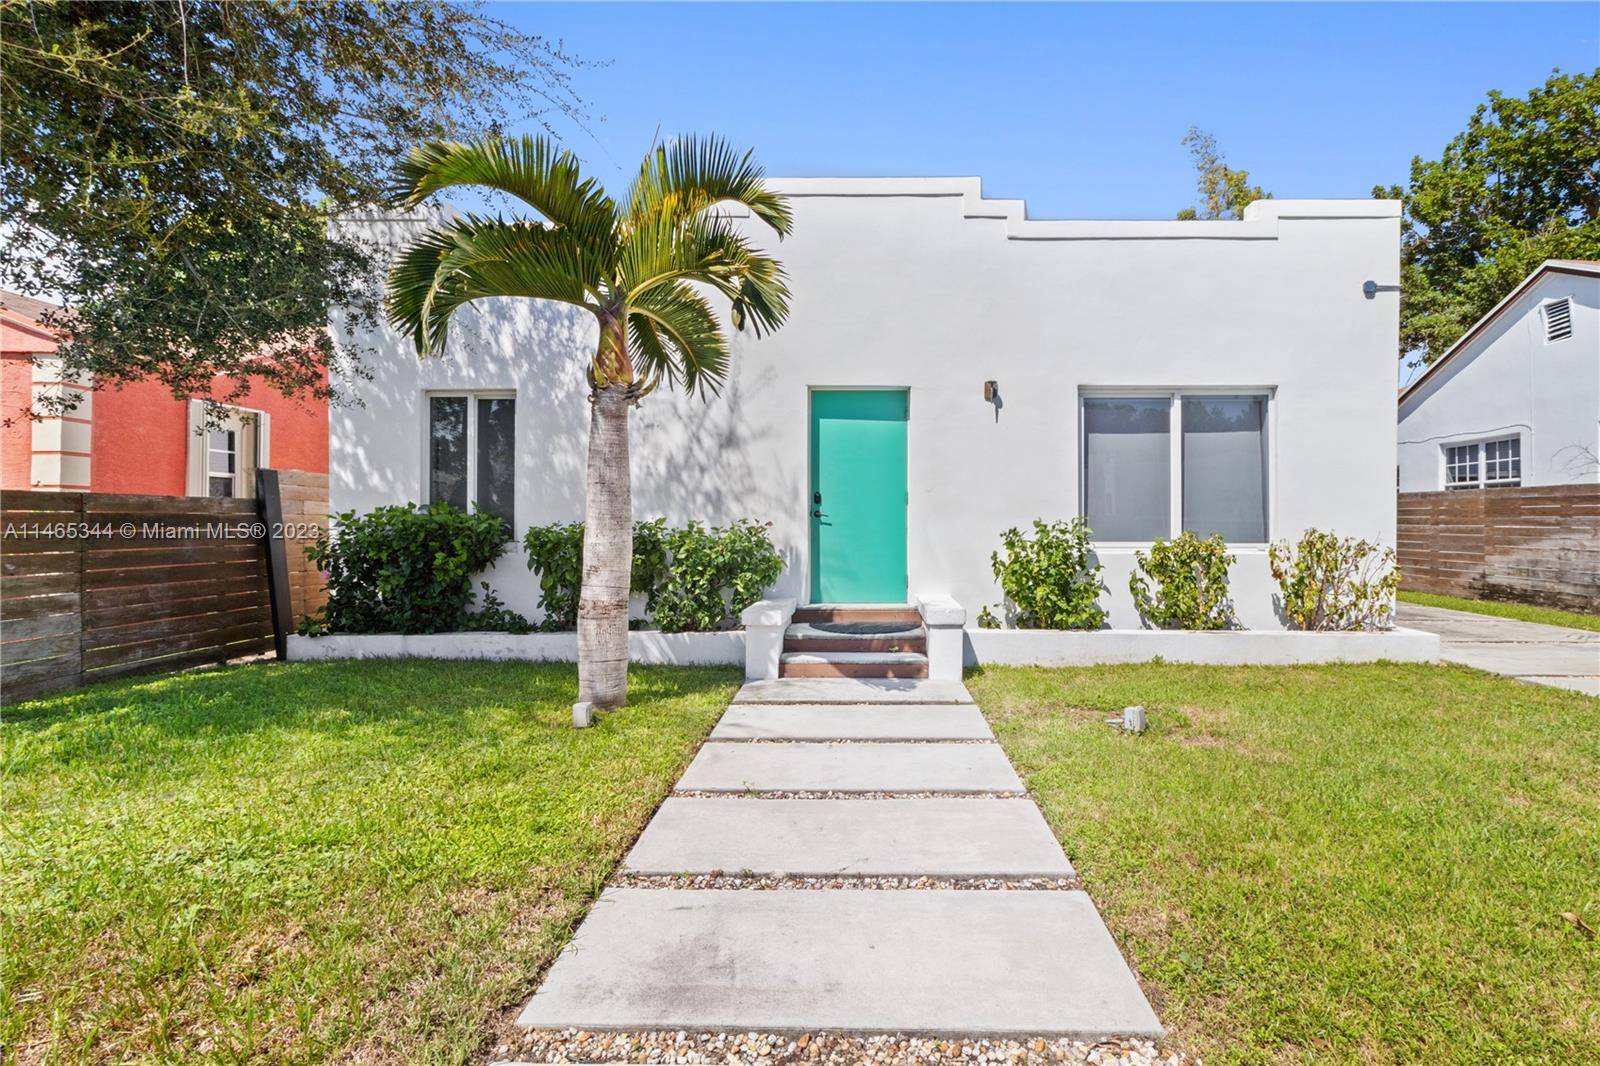 Welcome to your dream home in the highly sought after Design district !